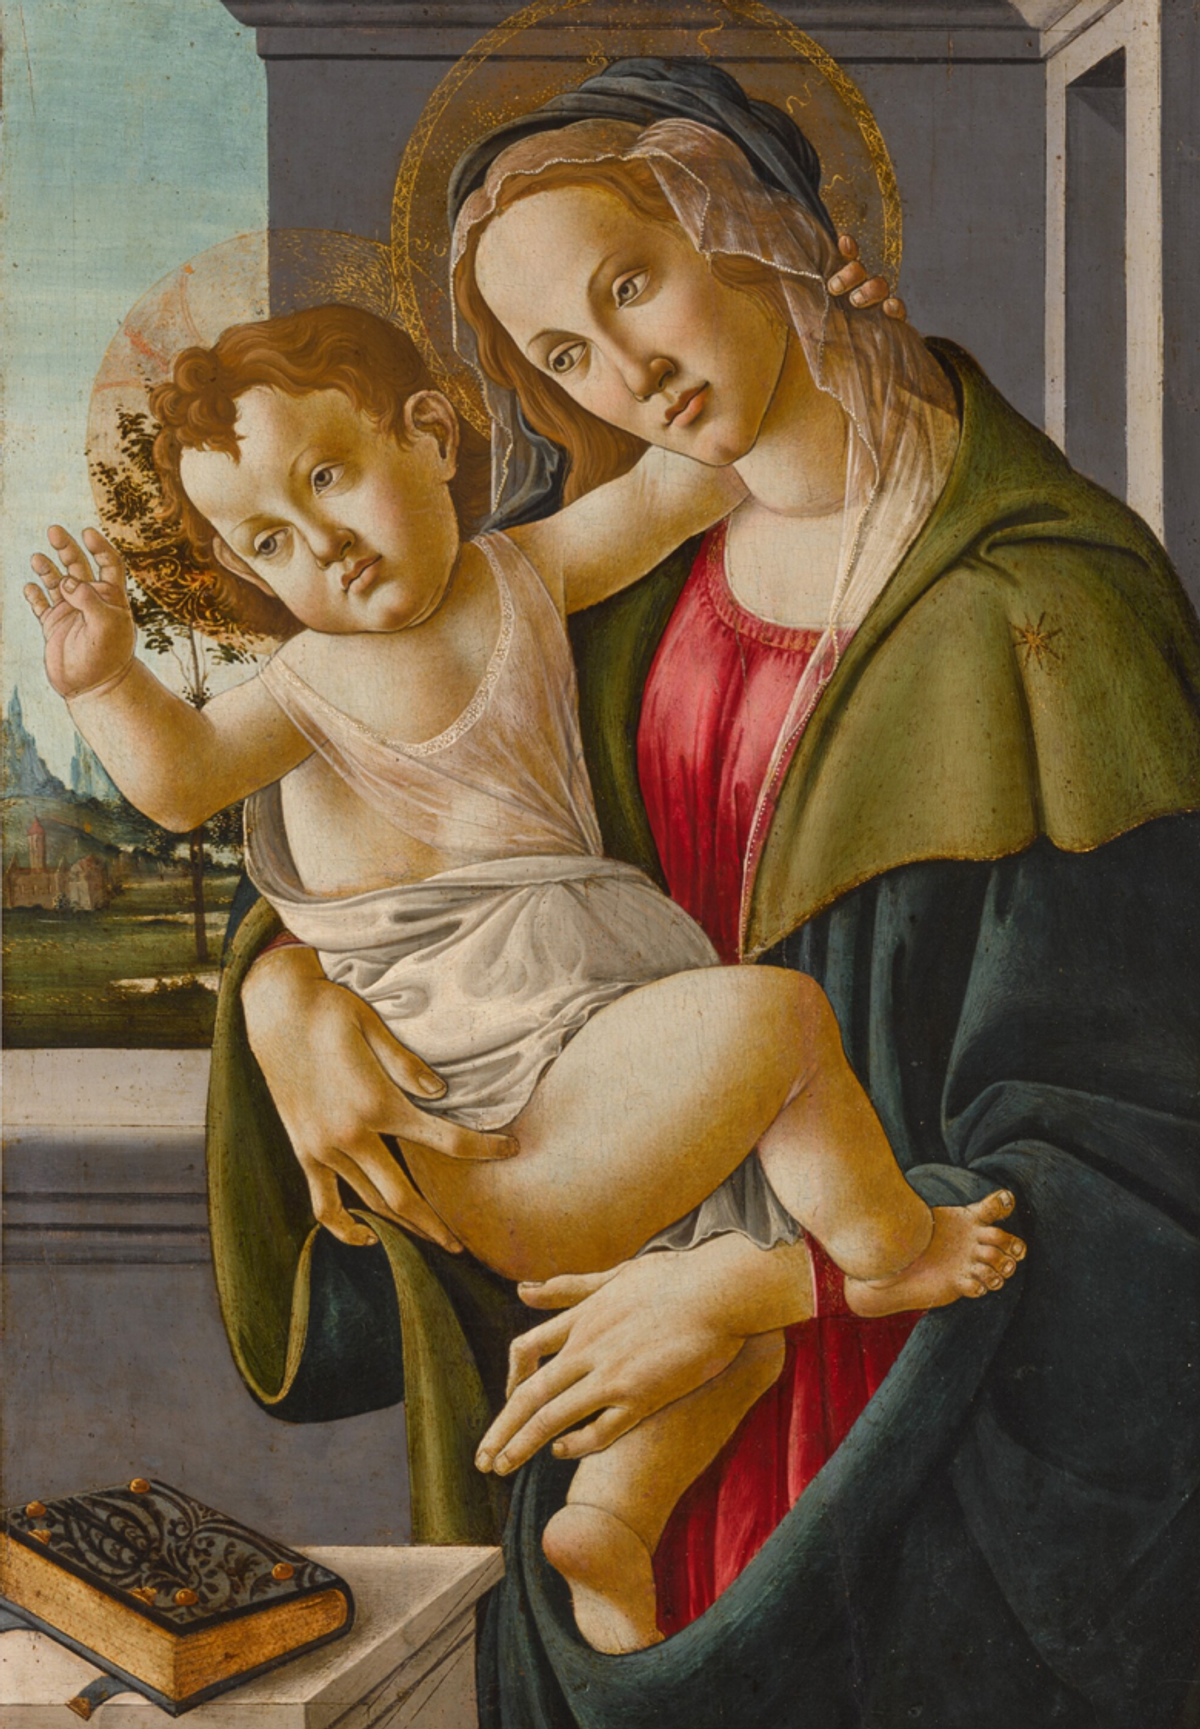 The Virgin and Child, with a landscape beyond, Botticelli and Studio, 1490s, made £3.4m at Sotheby's Old Master evening sale in London this week

Courtesy of Sotheby's